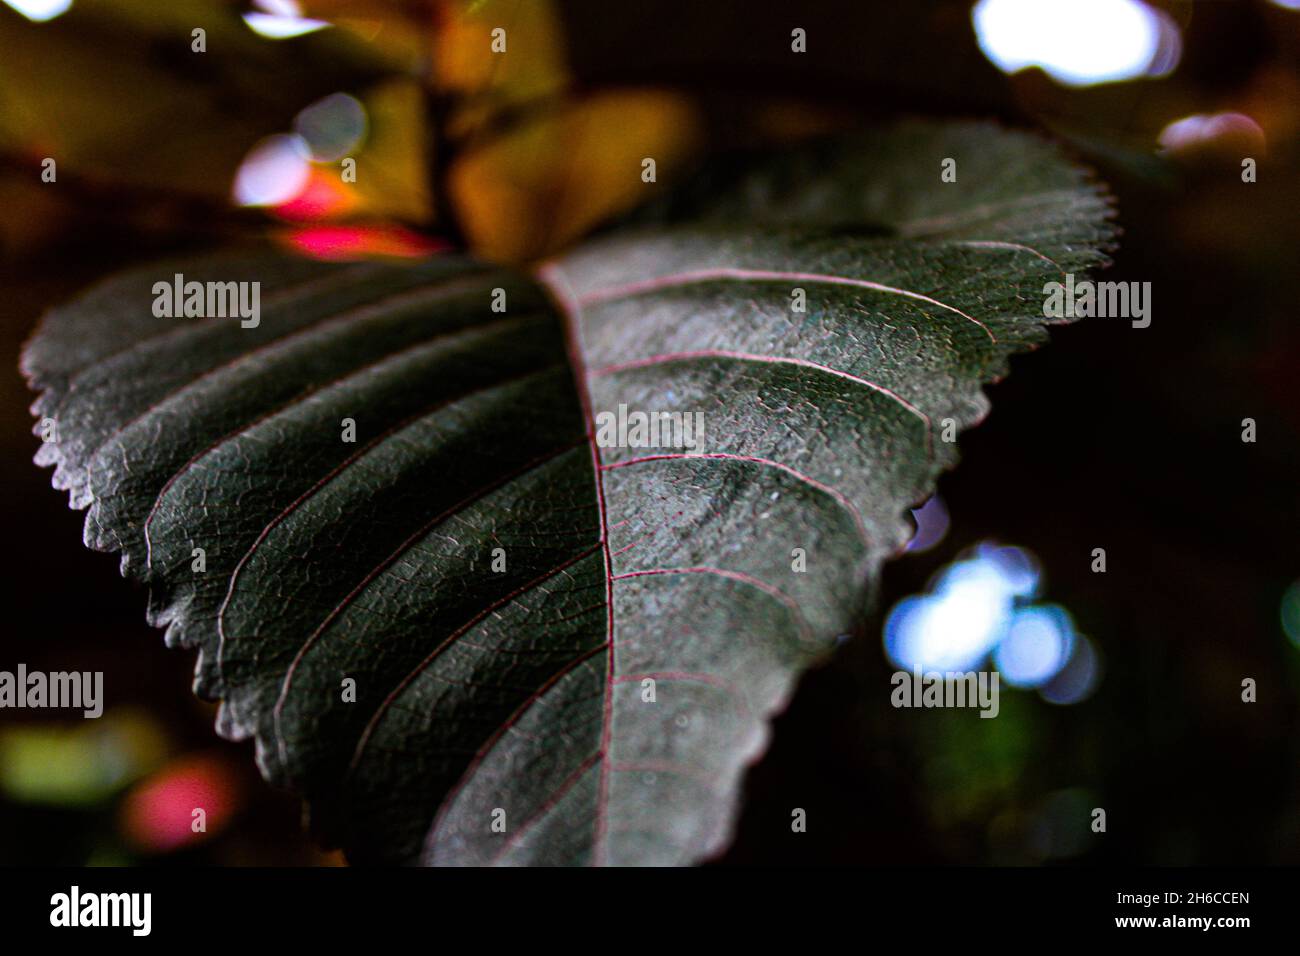 A green leaf with veins Stock Photo